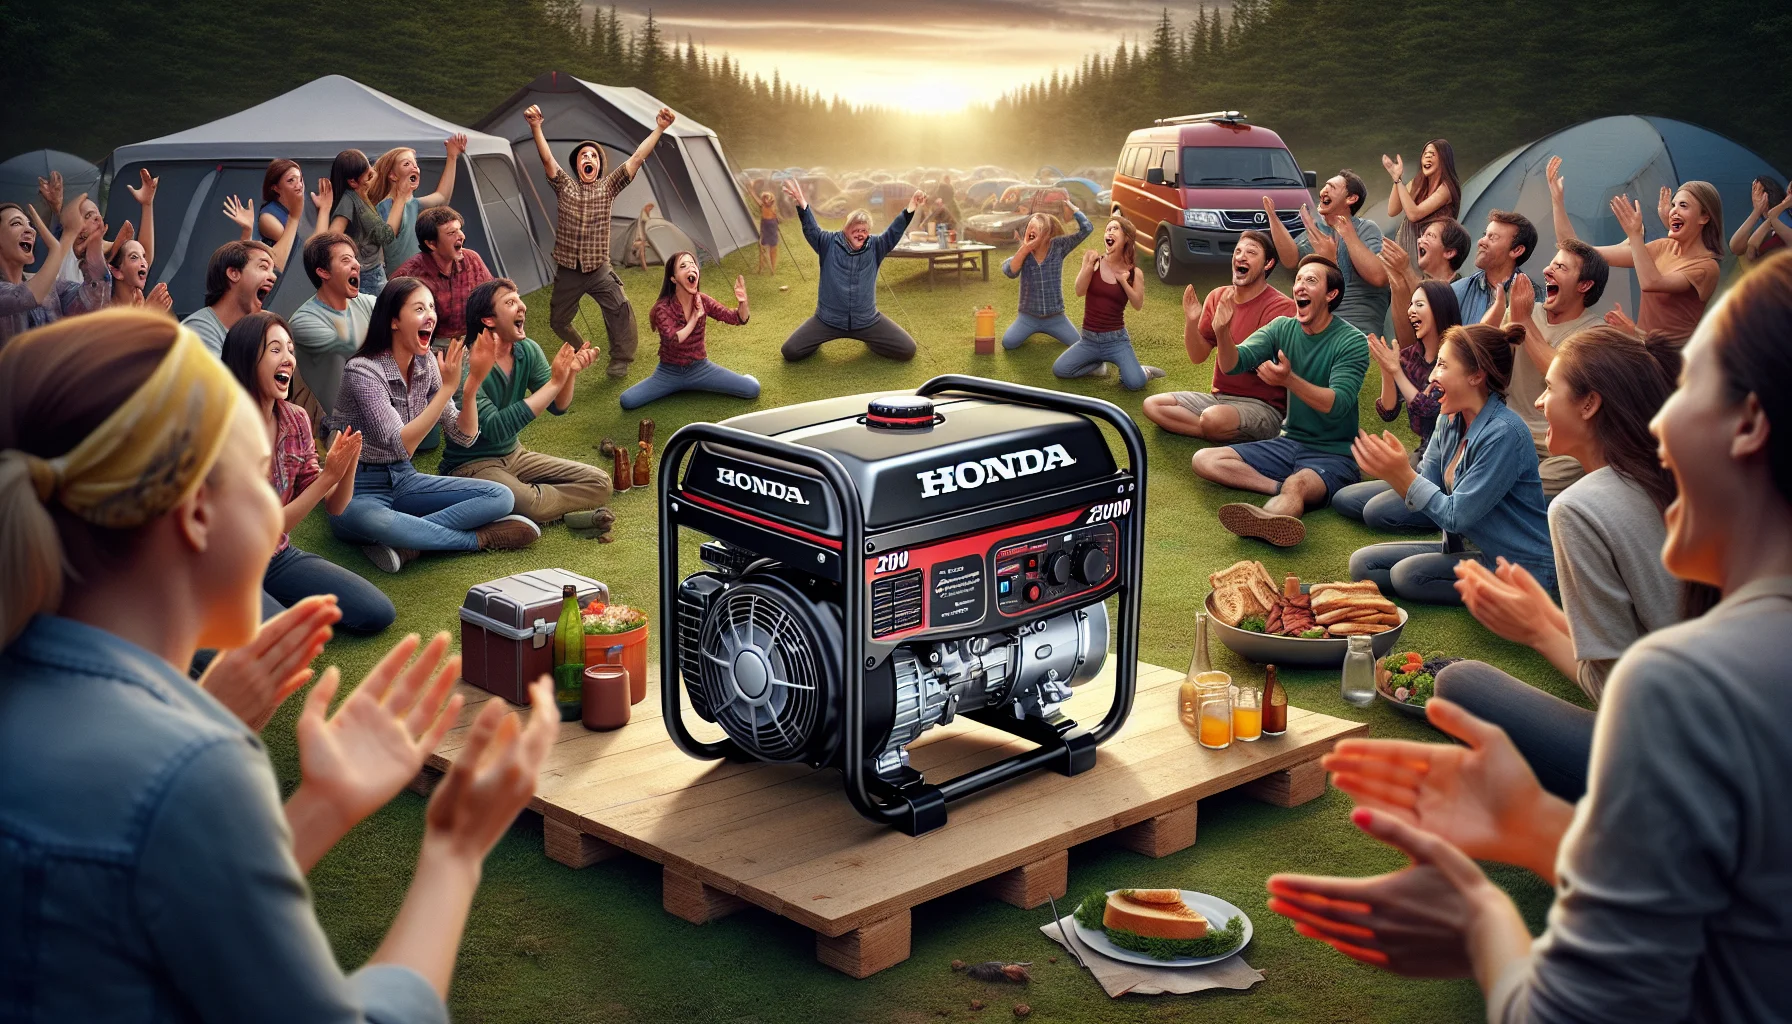 Imagine an interesting scene where a Honda 2000 Generator acts as the hero of the story. The generator is stylishly designed, compact, has sophisticated red and black design elements and is now at the center of a comical scenario. The generator is at a camping site, and it's surrounded by a group of cheerful people who are wildly applauding. Everyone is having fun due to the unexpected heroism of the generator, which saved their day by powering up a huge movie projector for a night movie in the wild. An air of amusement fills the scene as everyone laughs and claps, with the generator zealously 'humming' as though taking a bow.